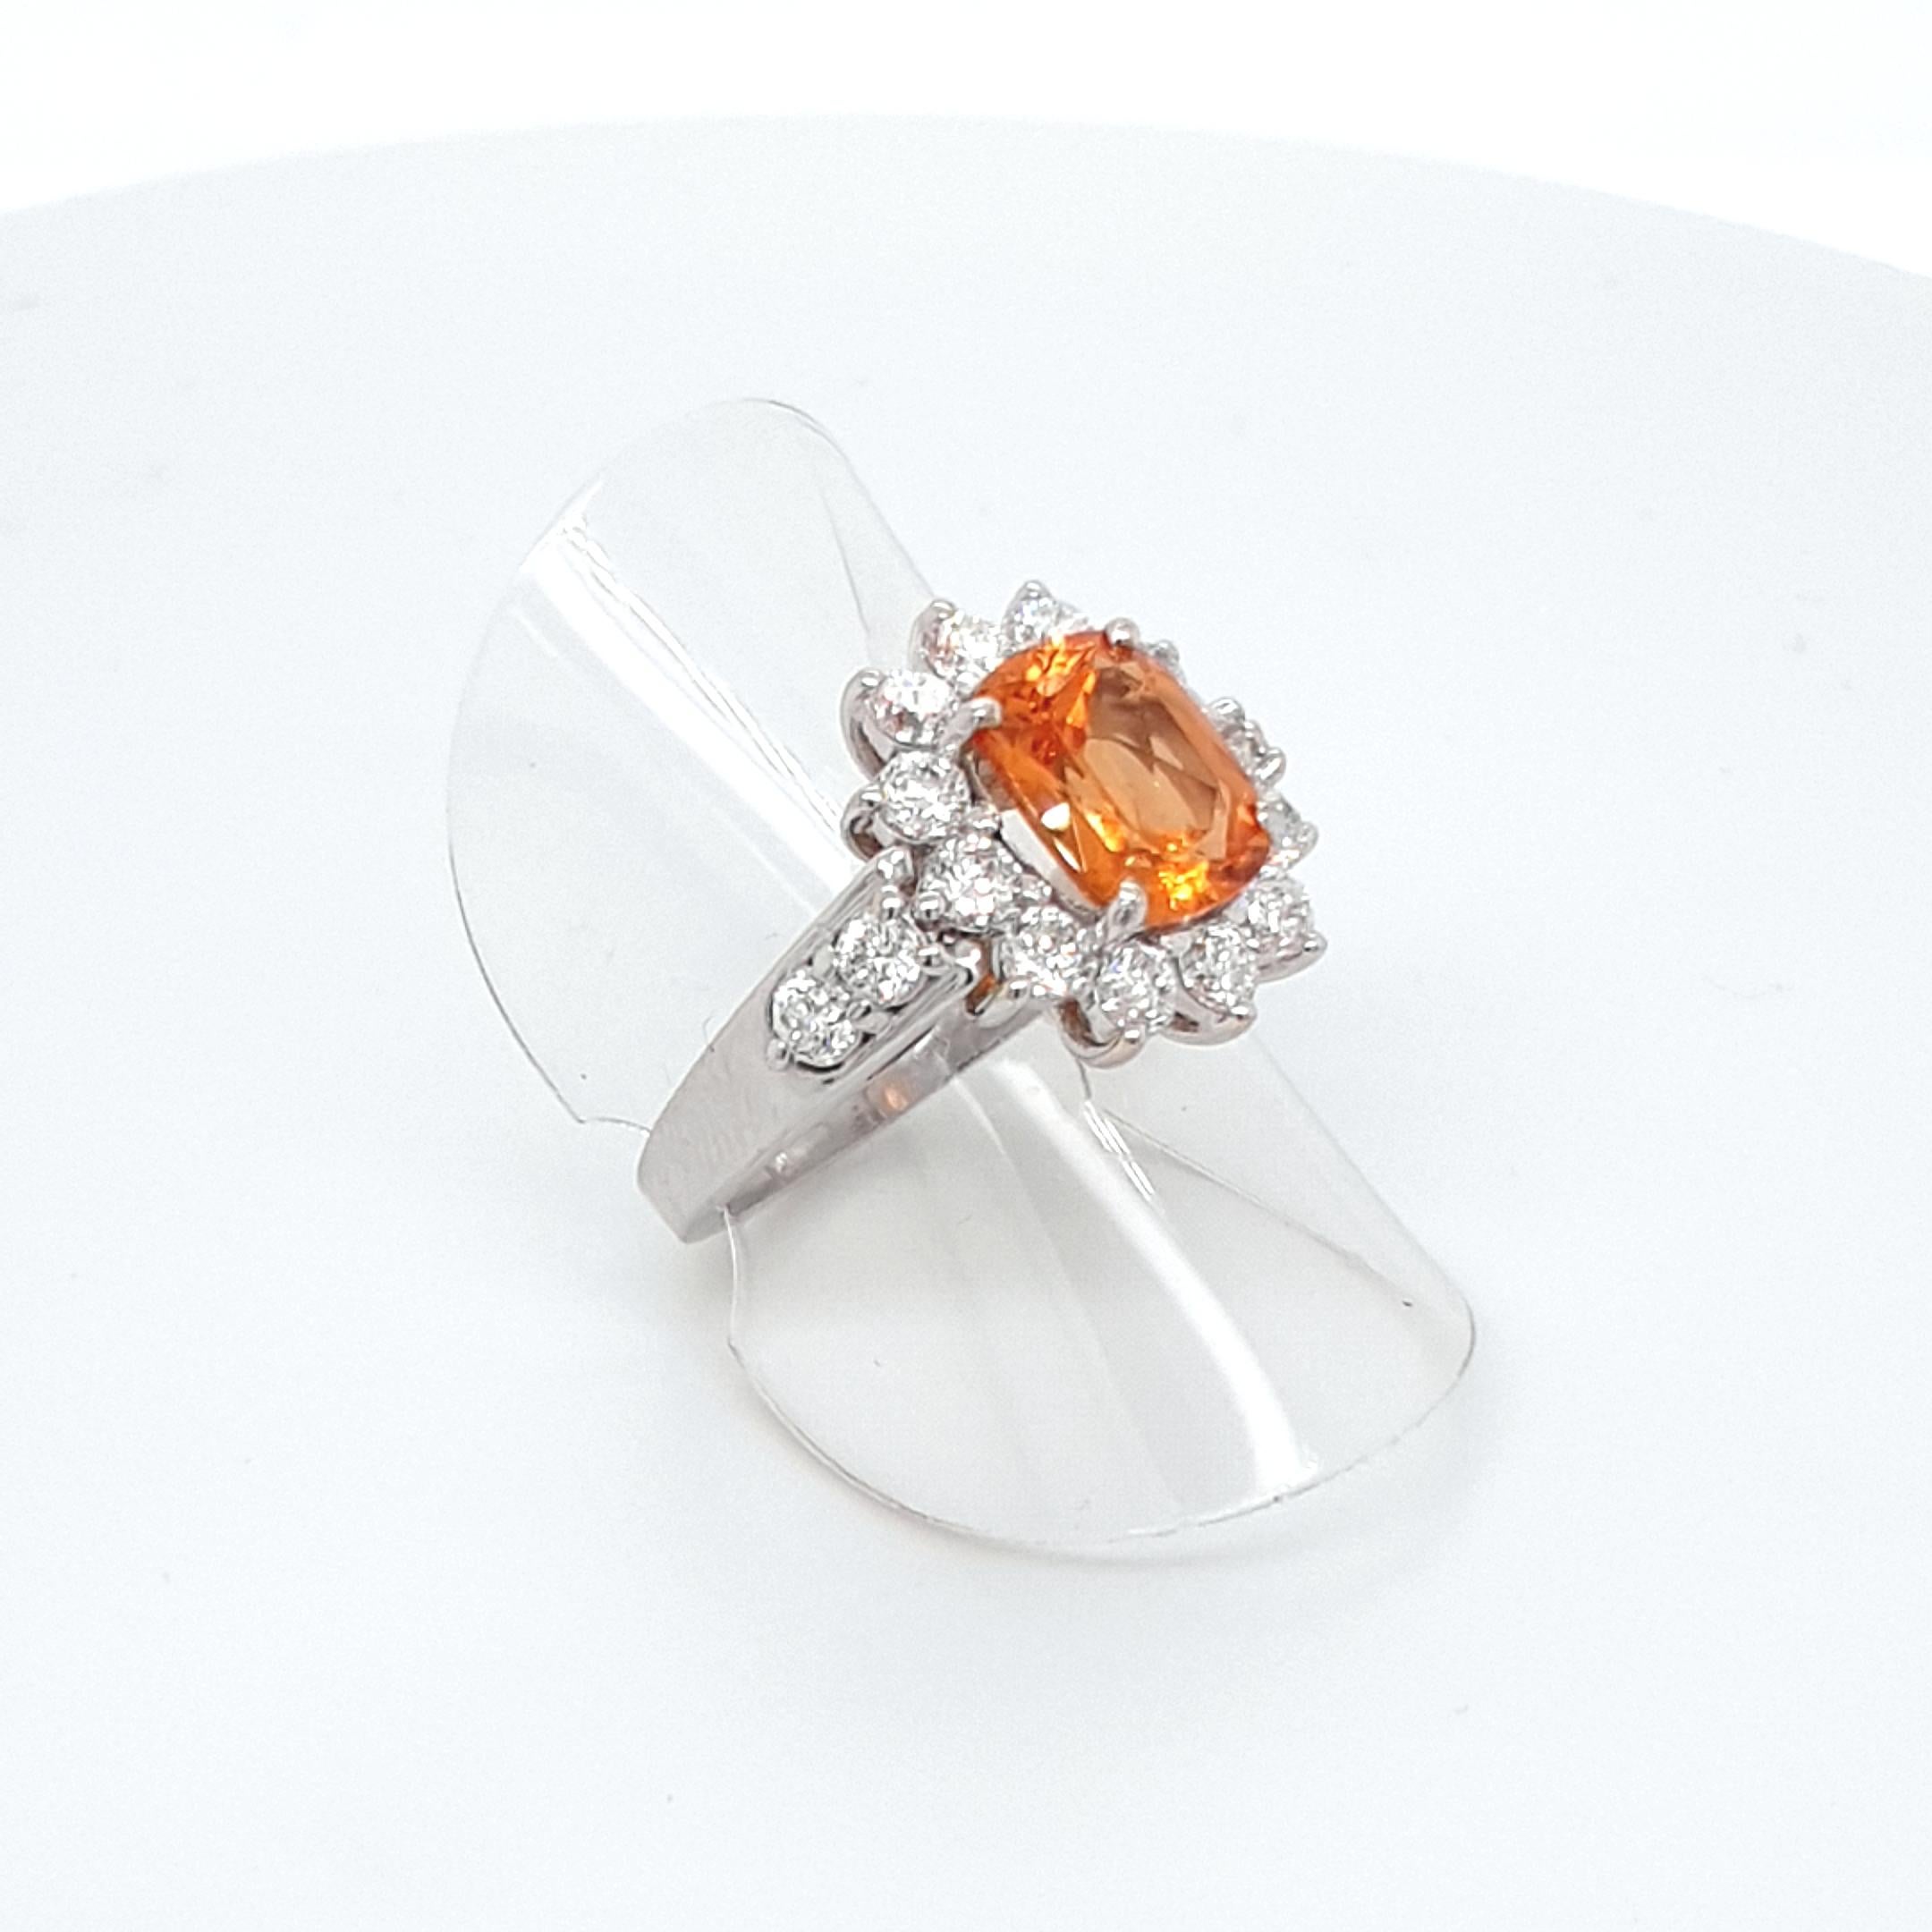 This Natural Faceted Orange Mandarine Garnet Ring with 18 Carat White Gold surrounded by 16 brilliant-cut Diamonds is totally handmade. 
Details:
ringsize: 7 1/2 (55)
Fac. Mandarine Garnet, 3.68 ct.
16 diamonds: 2,10 ct., H / VVS